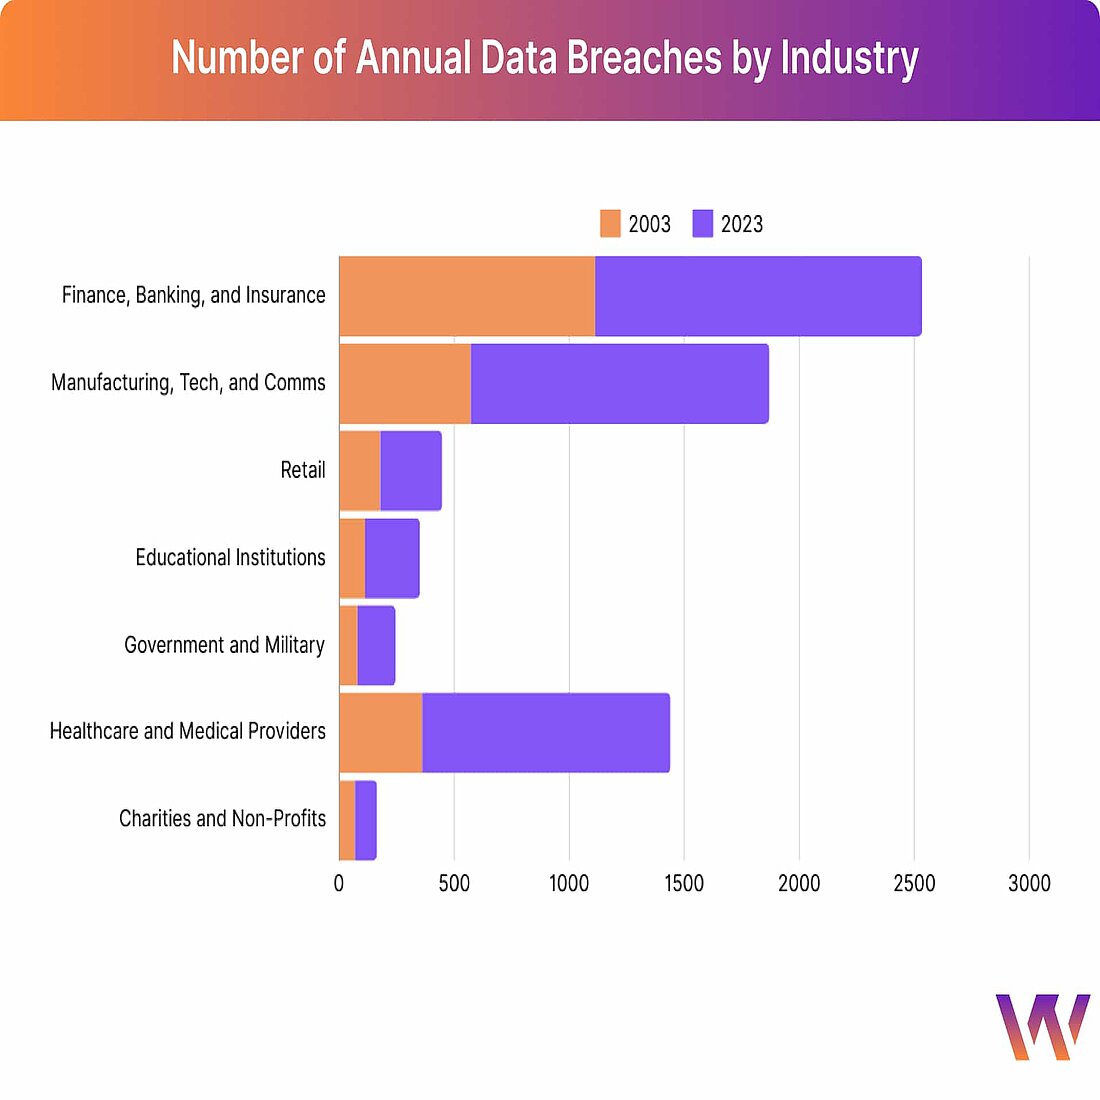 Annual data breaches in the US, 2003 and 2023